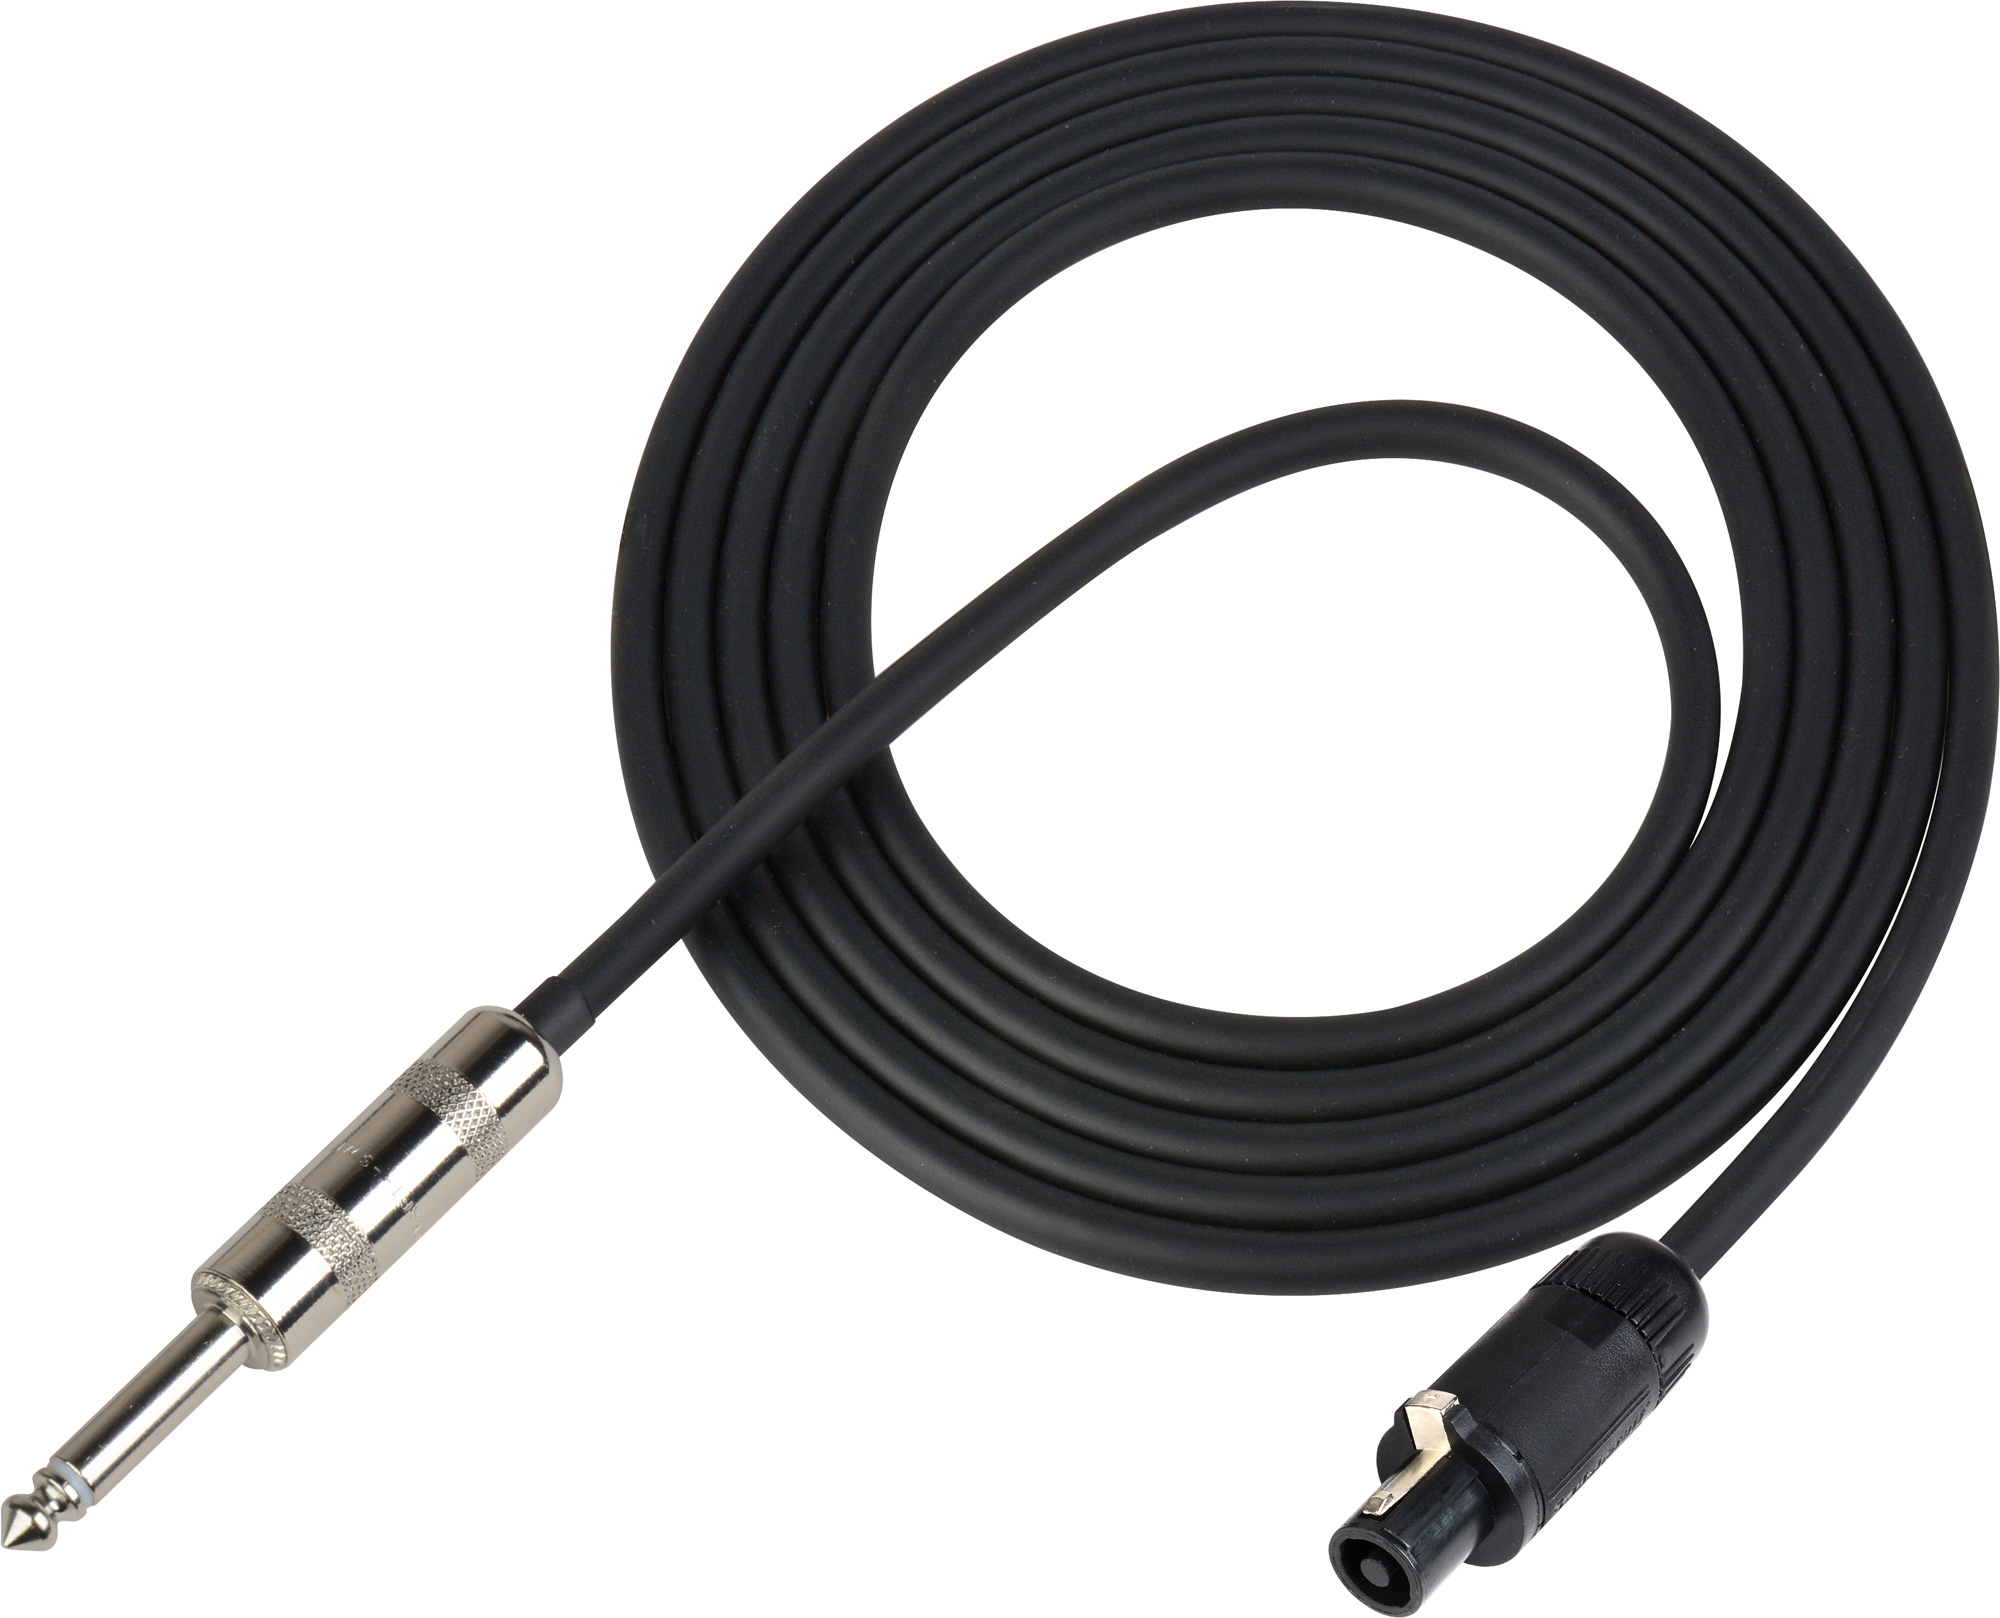 Switchcraft by Sescom SWC-12SP4MS005 12-Gauge Speaker Cable - HPCC4F 4 ...